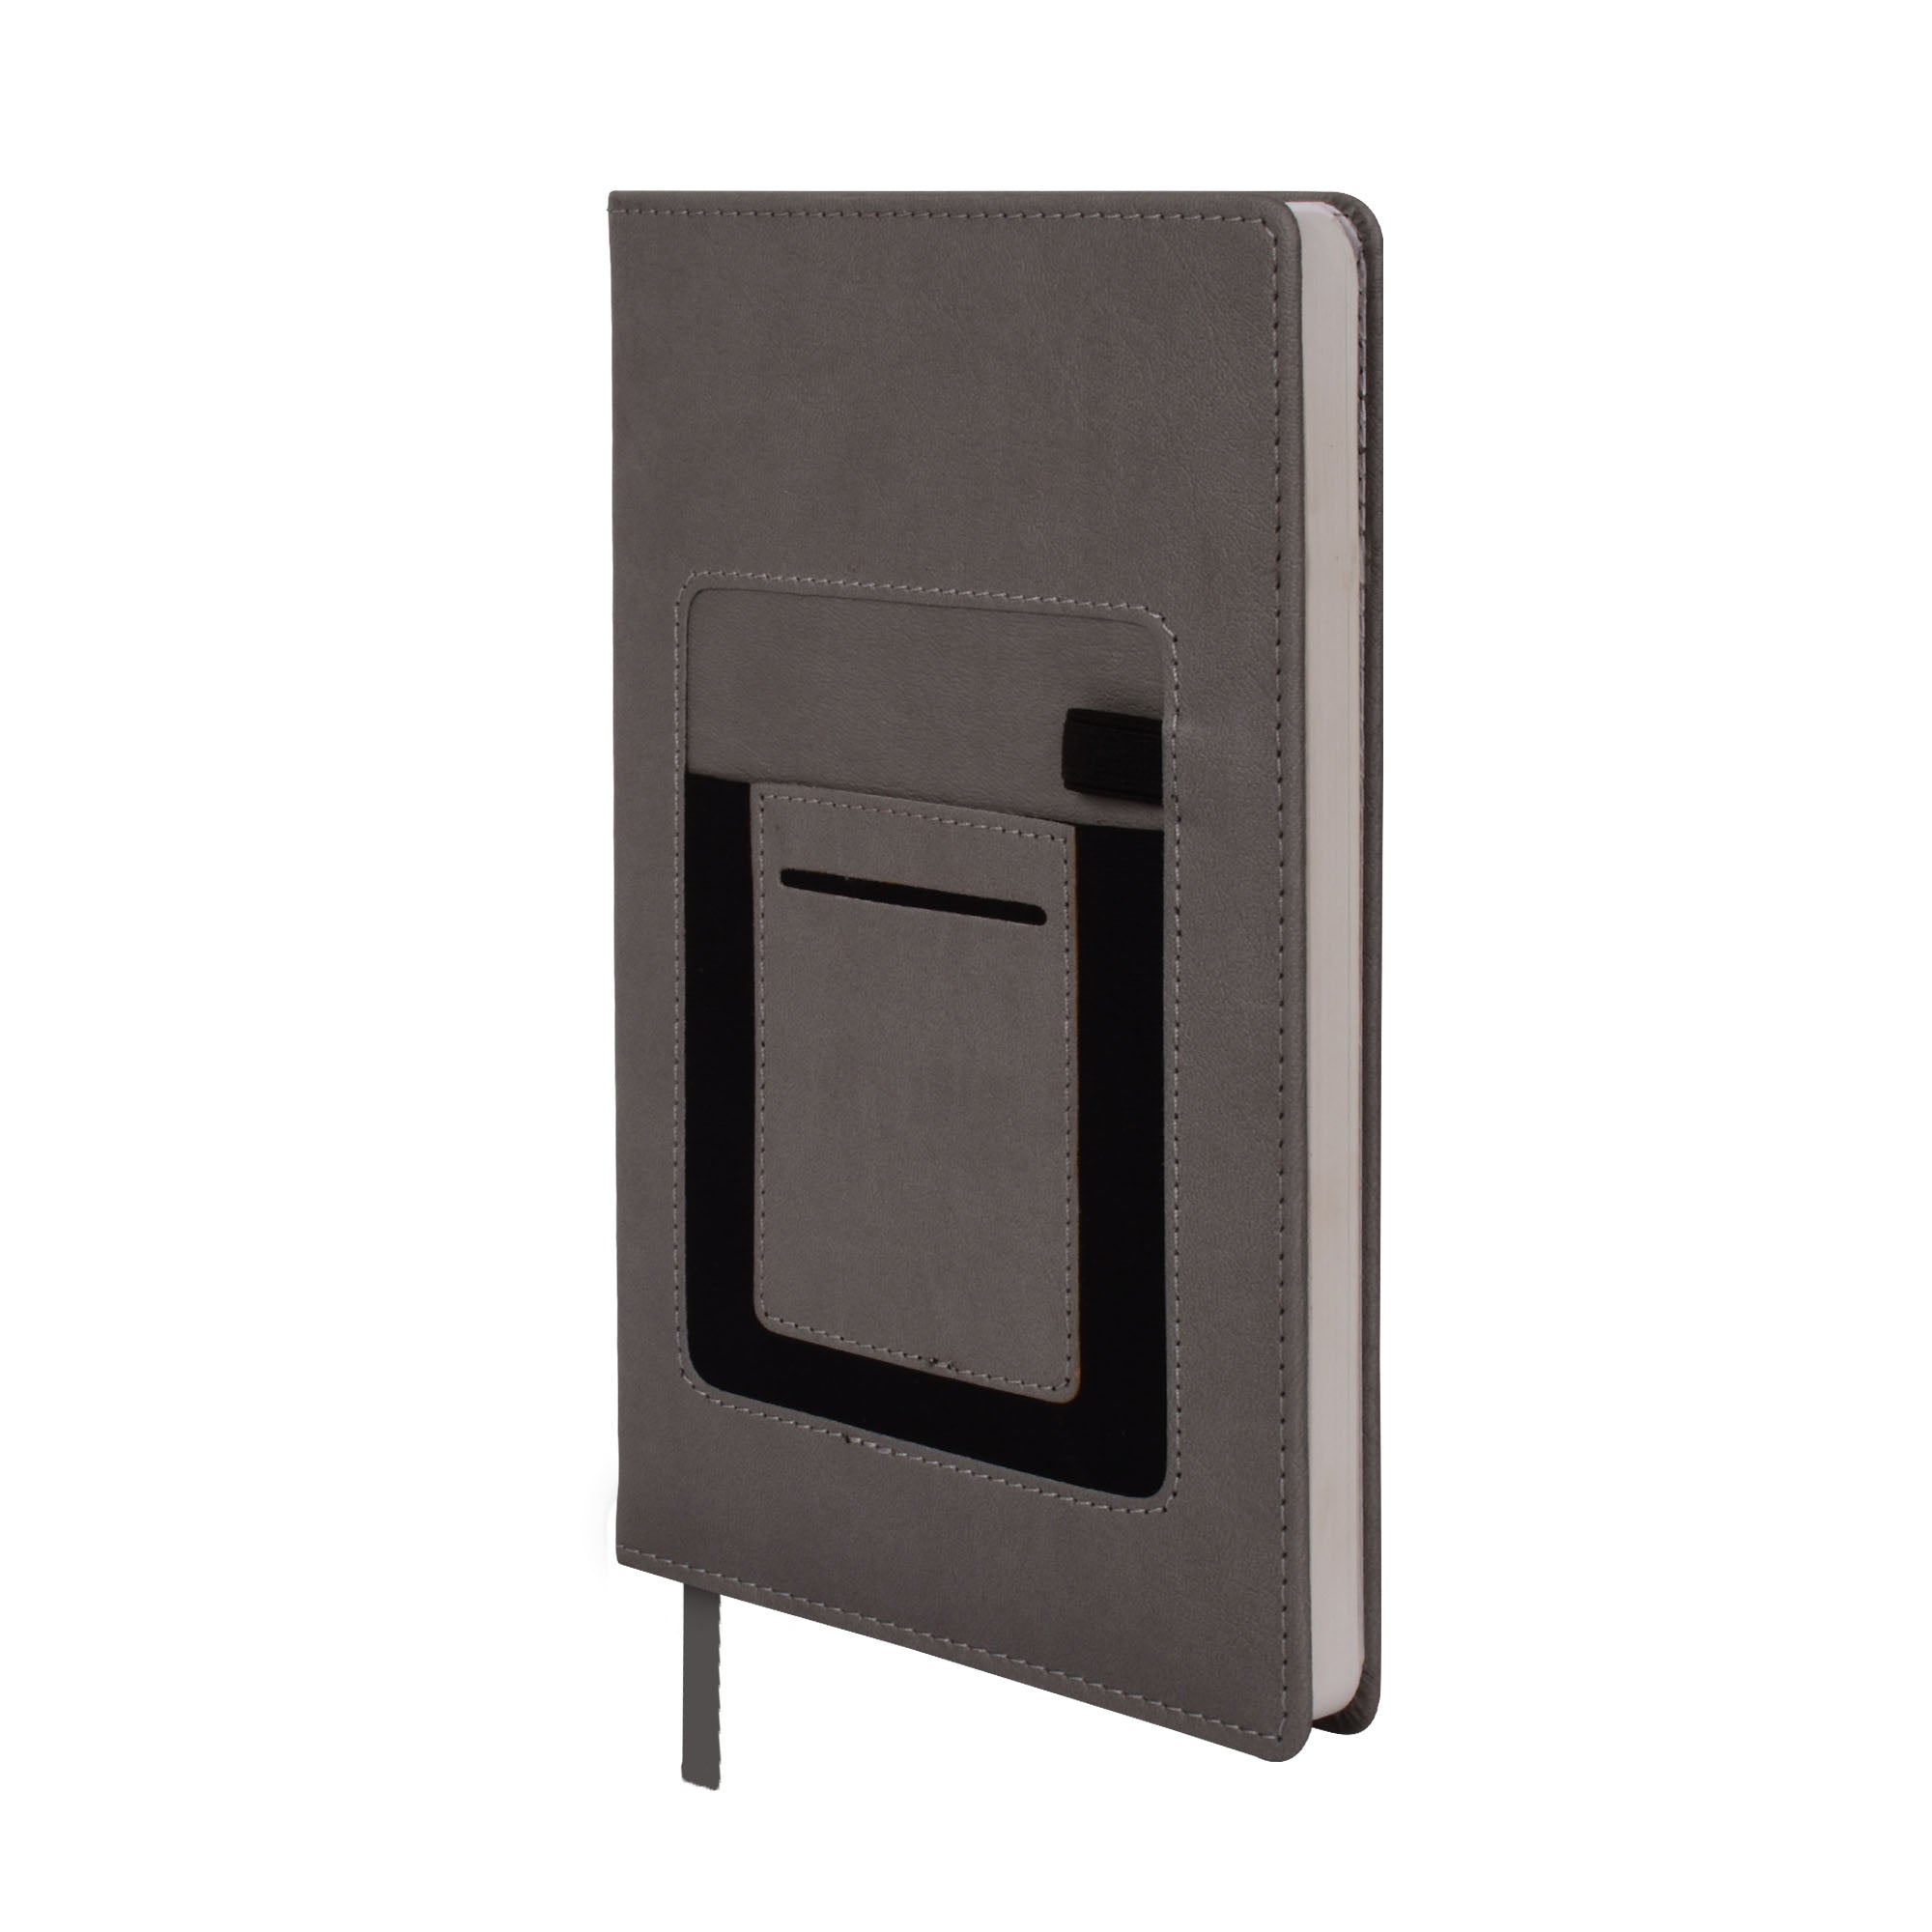 Edgemont Diary - A5 Hardbound Faux Leather Notebook - Grey